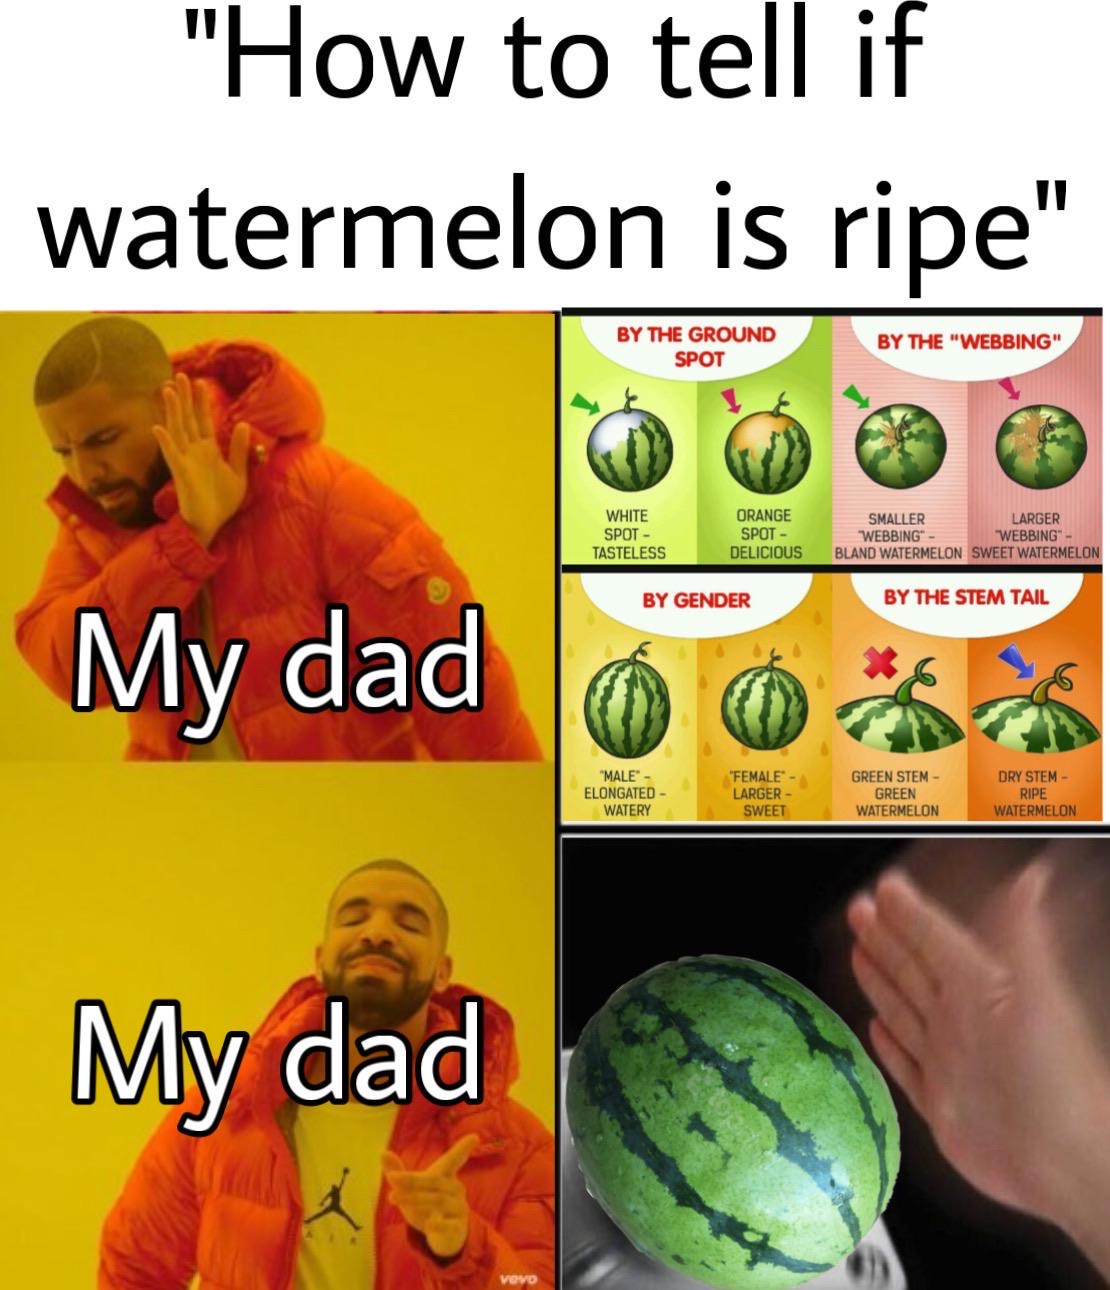 watermelon - "How to tell if watermelon is ripe" By The Ground Spot By The "Webbing" White Spot Tasteless Orange Spot Delicious Smaller Larger "Webbing" "Webbing" Bland Watermelon Sweet Watermelon By Gender By The Stem Tail My dad "Male Elongated Watery "